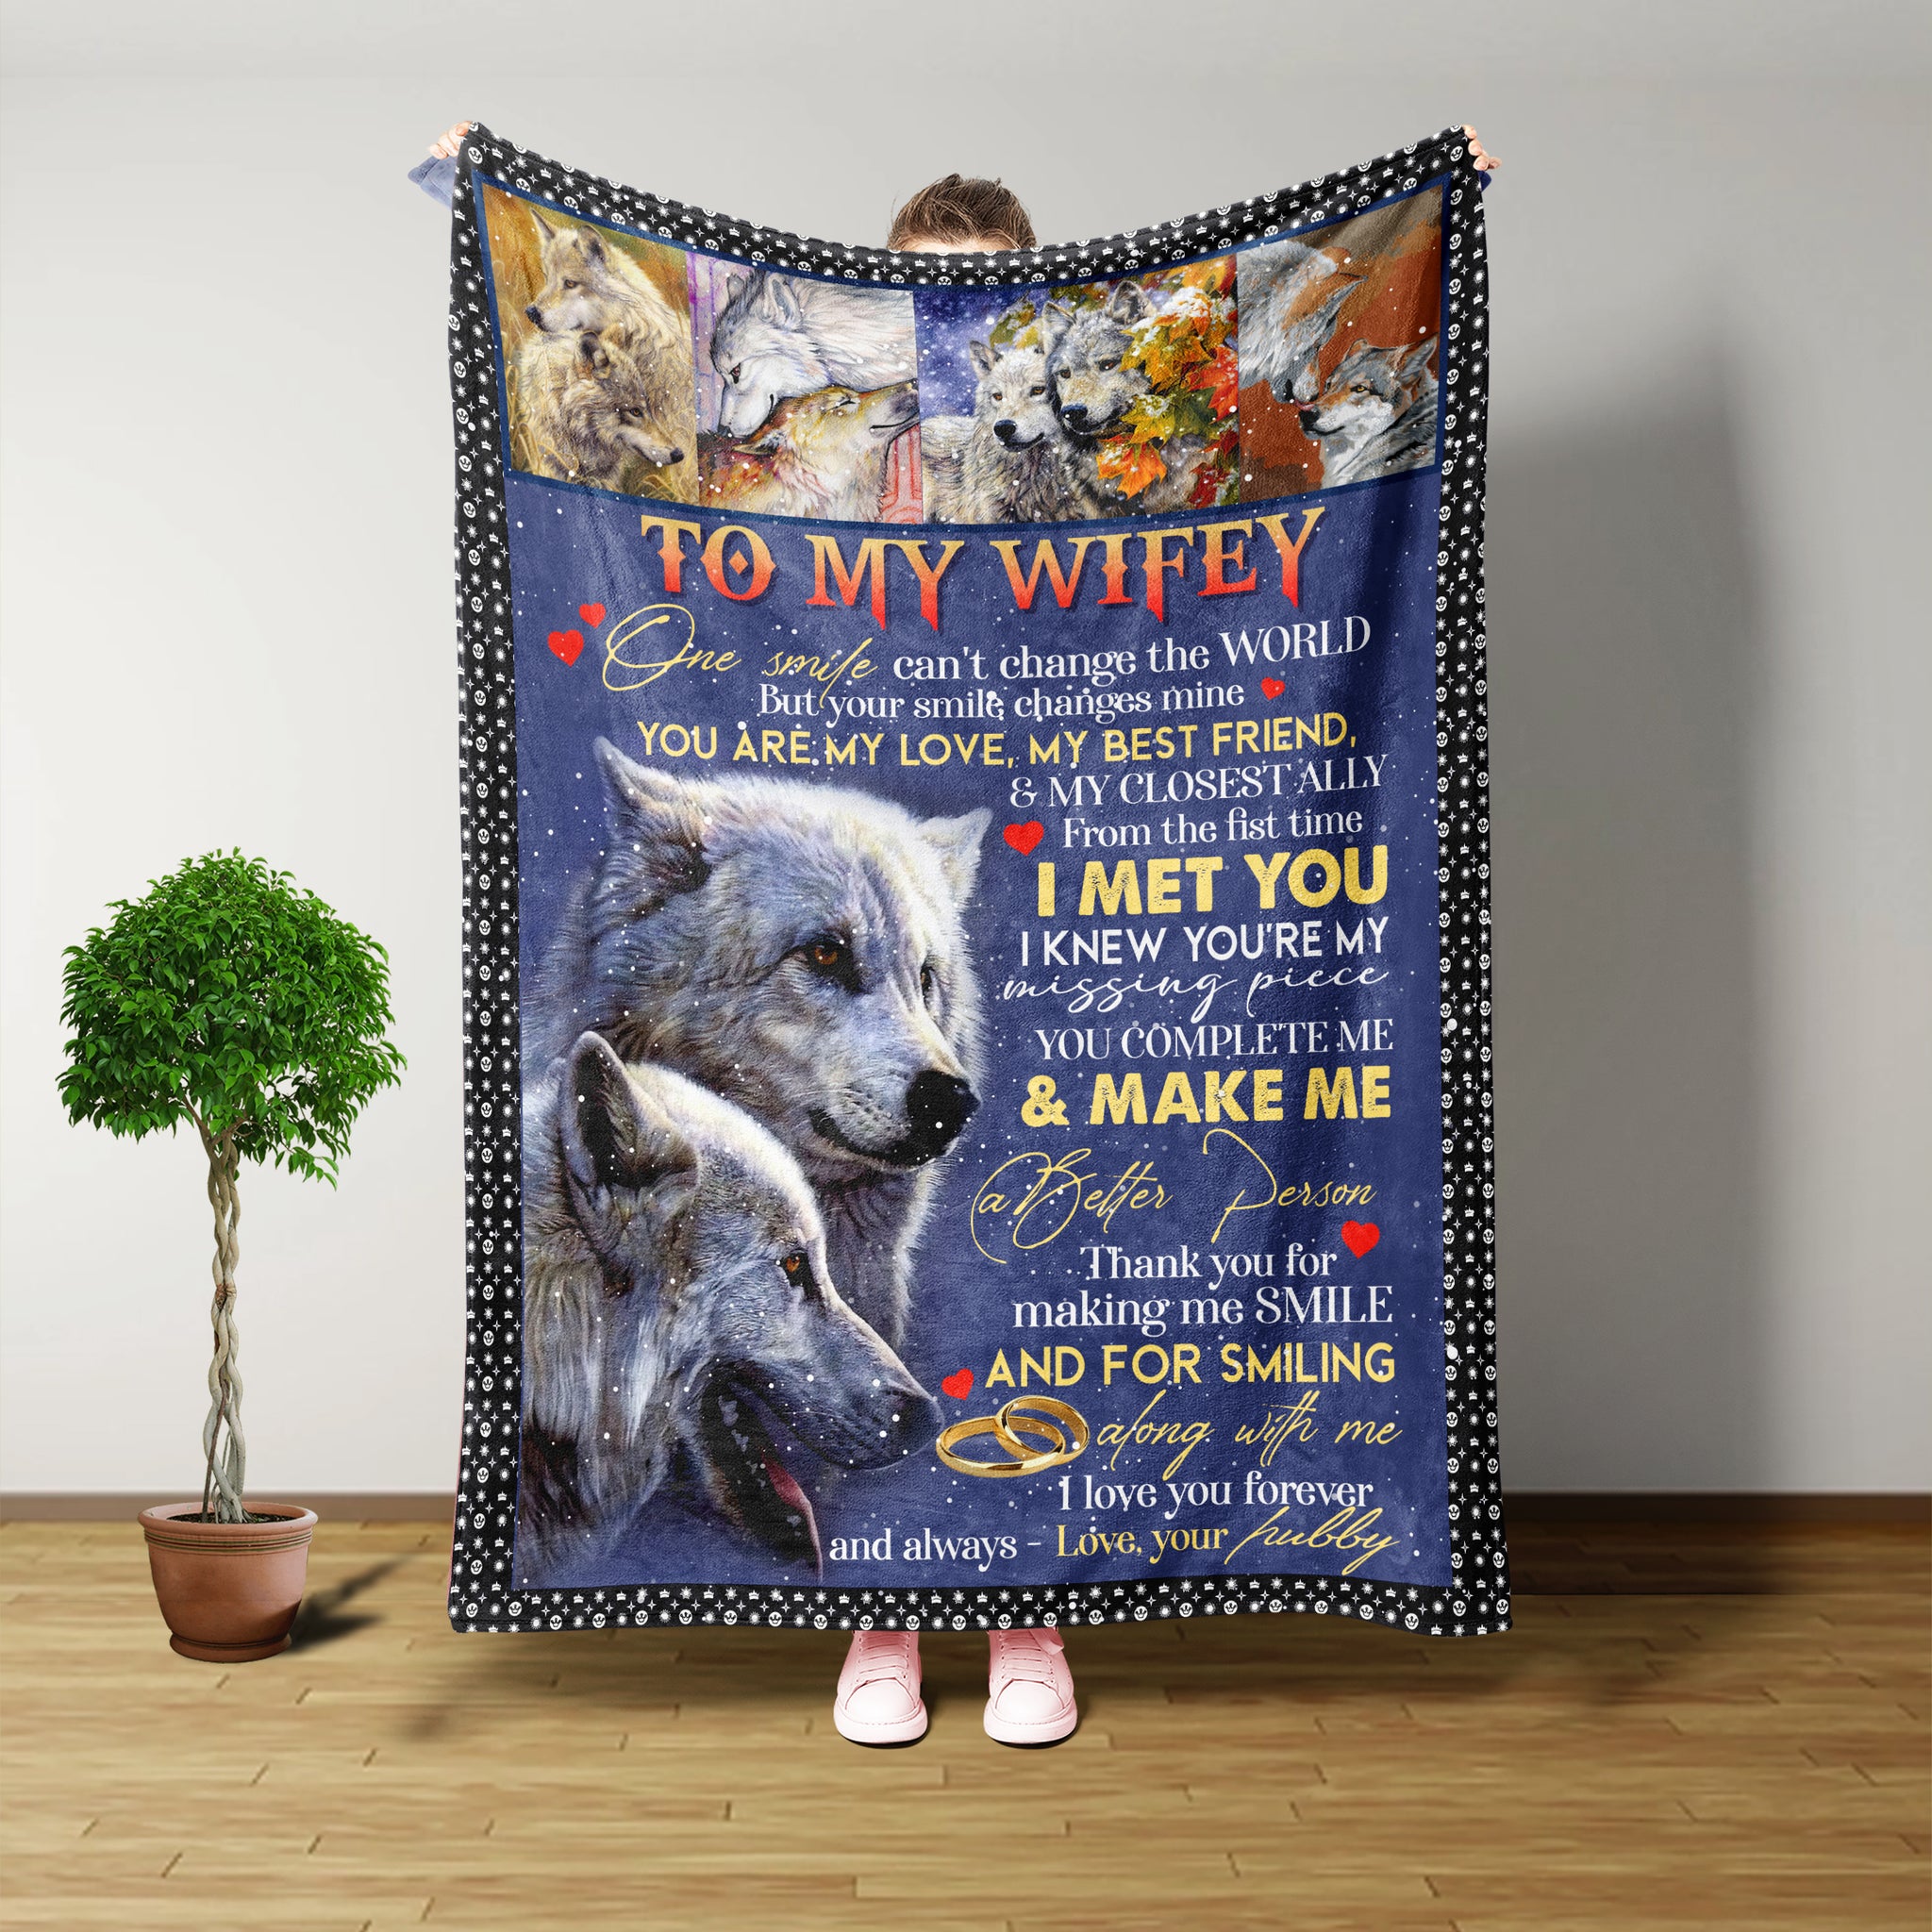 Personalised Blanket, To My Wifey Blanket, Couple Blanket, Gifts To Wife, Love Quoted, Anniversary 1st, Wolf Quotes, Fall Throw Blanket